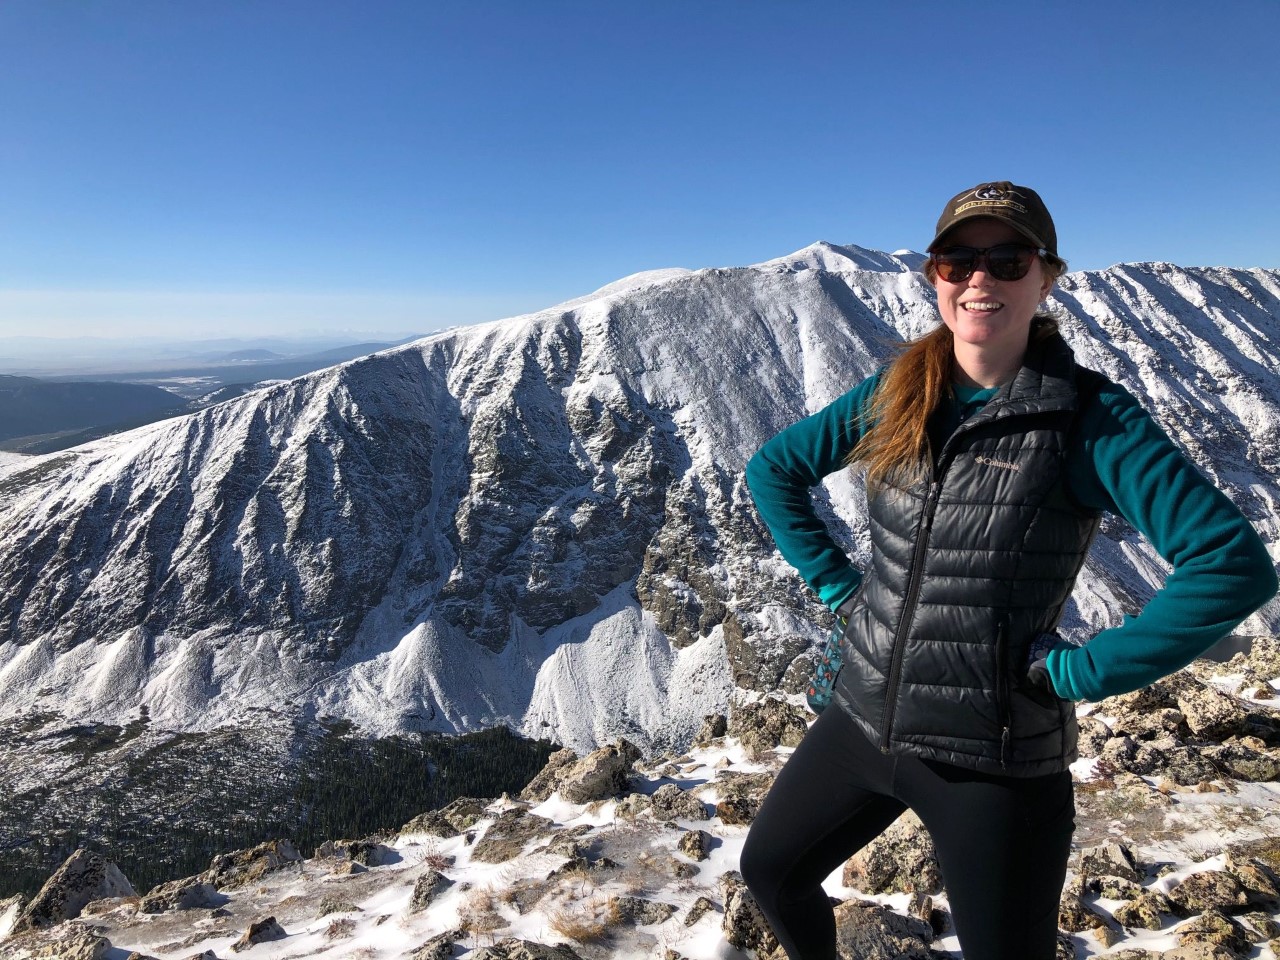 A white woman standing amidst grandiose mountains, wearing sunglasses, a hat, and a green sweater and black puffy vest with her hands on her hips.